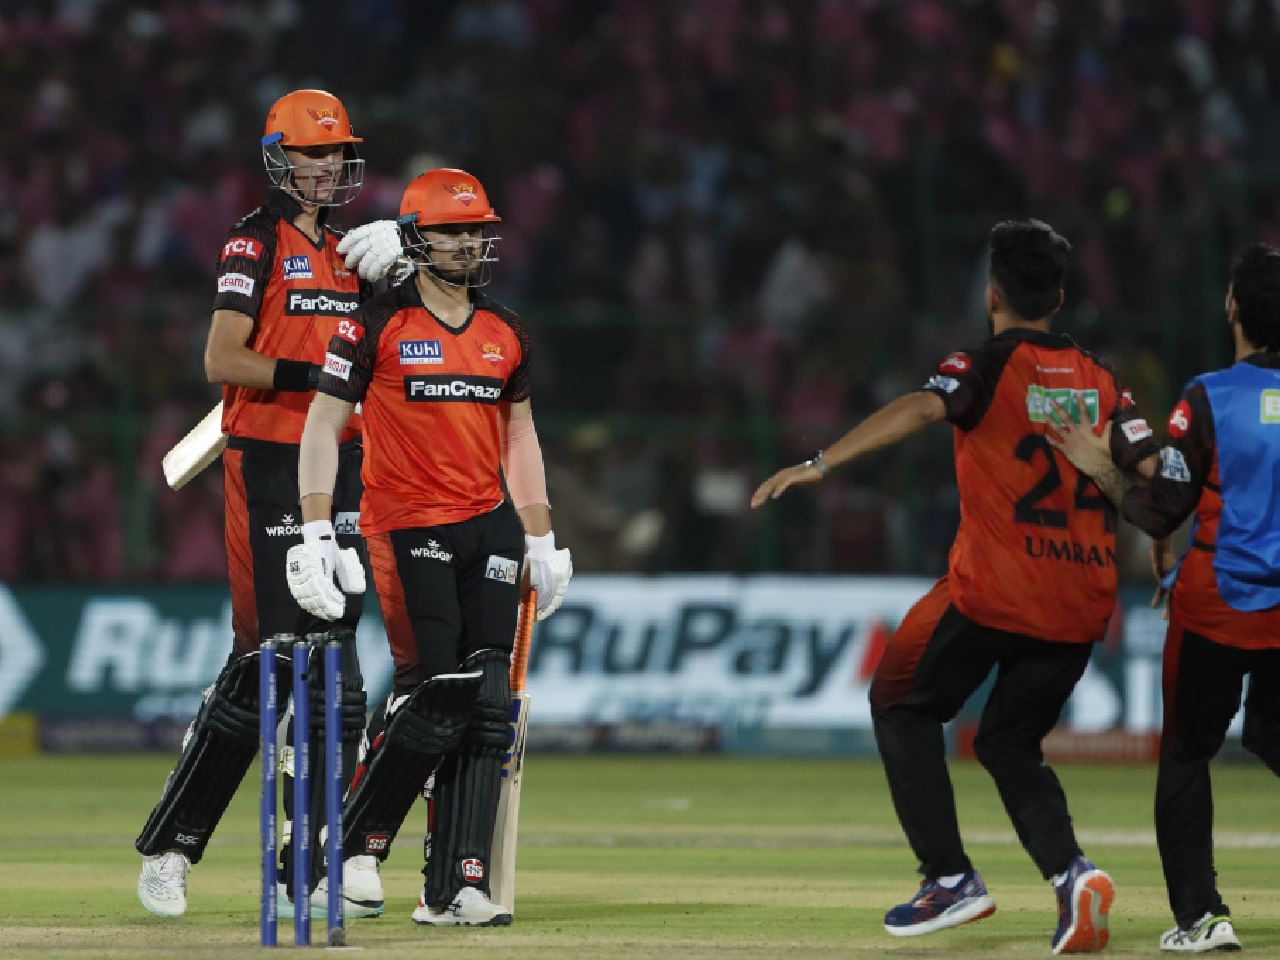 RR vs SRH Turning Point: Rajasthan Royals’ poor choice for 19th over allowed Sunrisers Hyderabad romp home